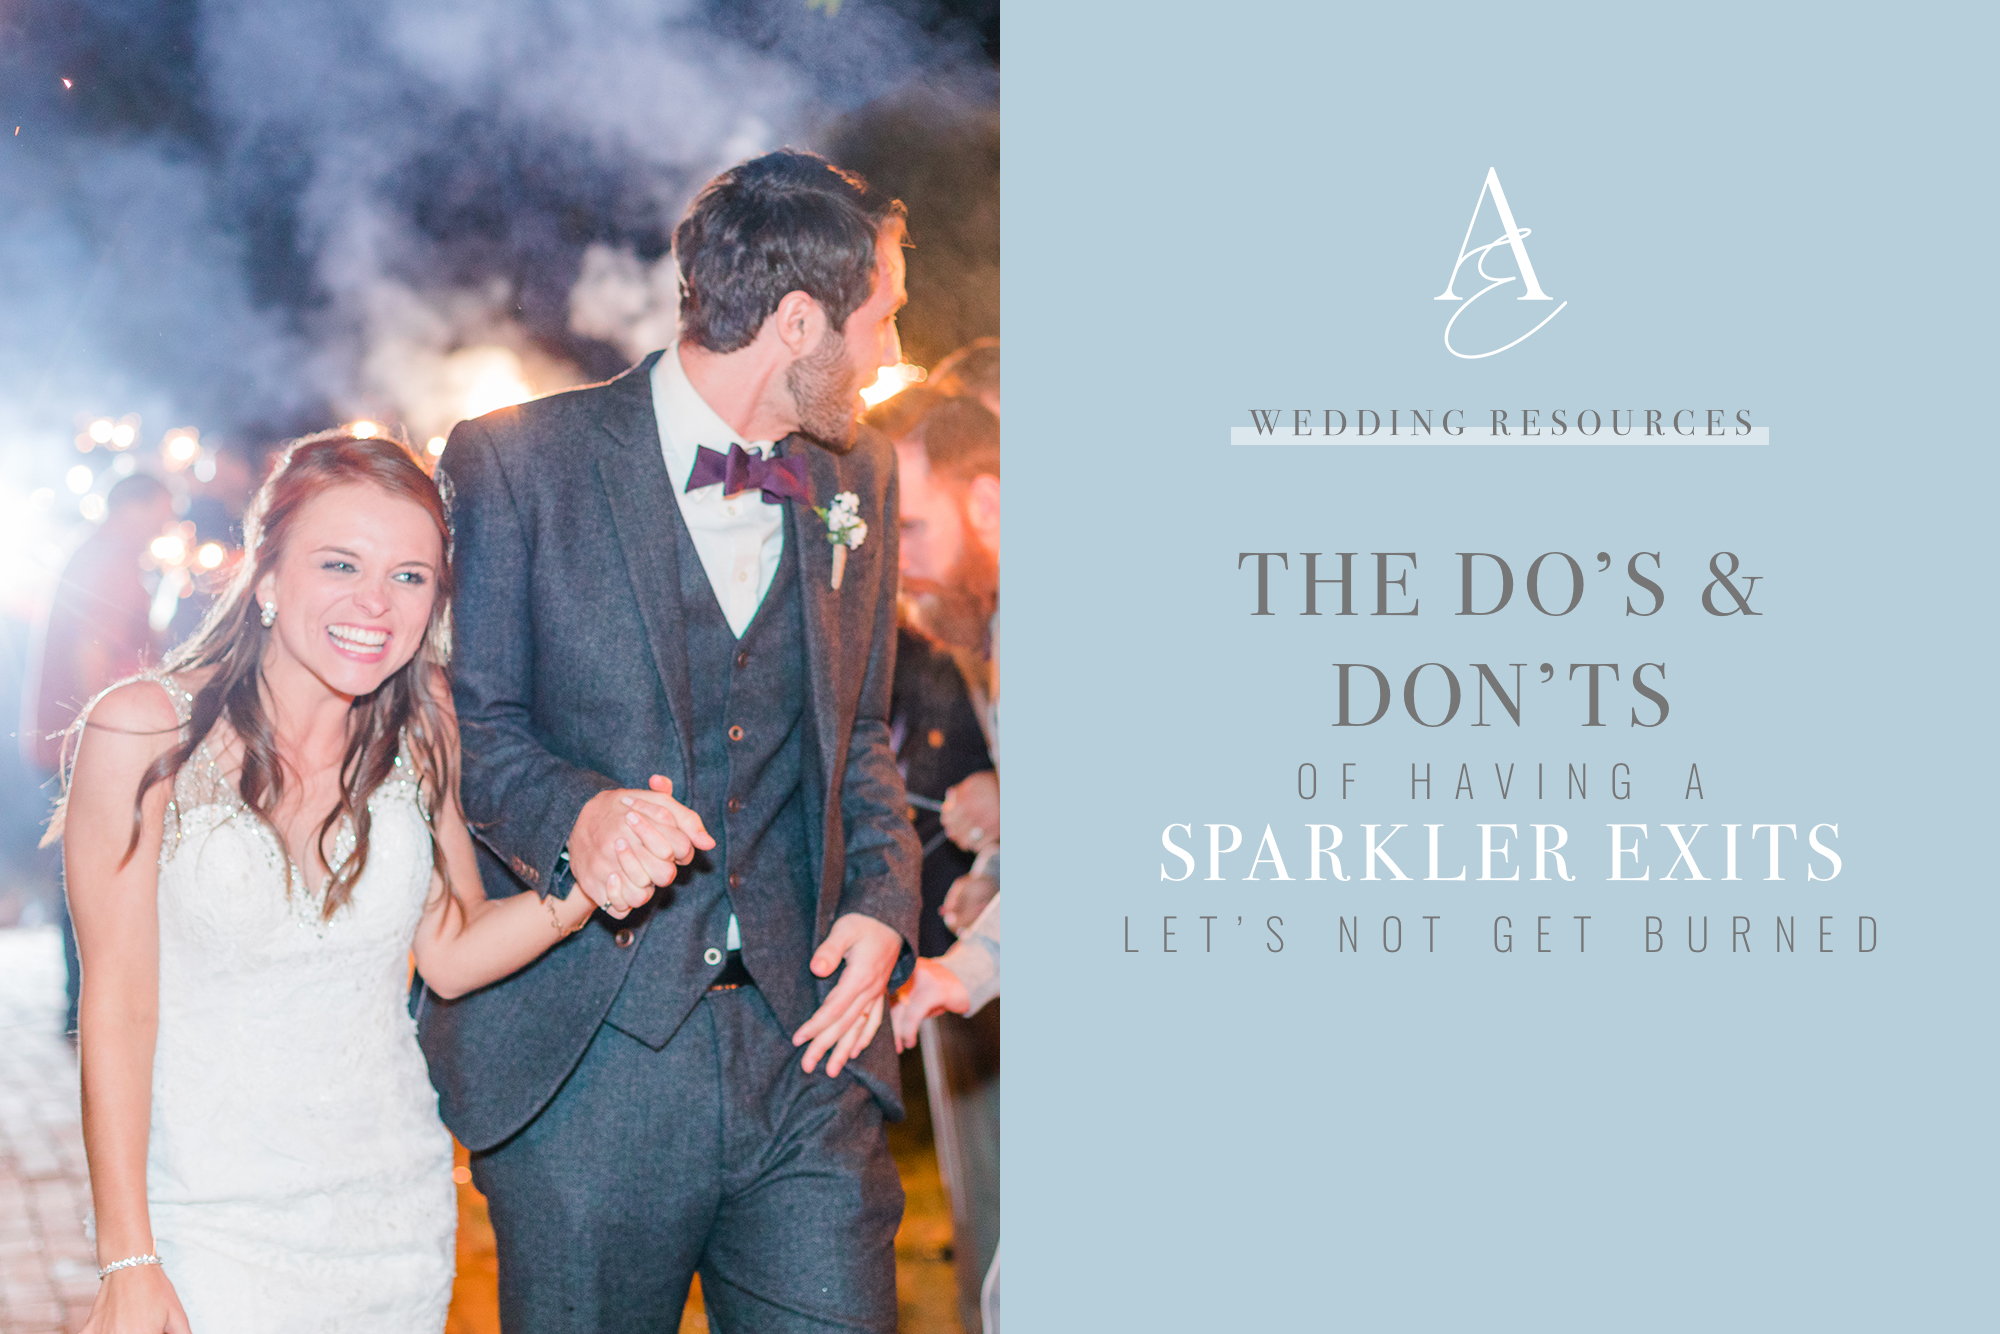 Graphic for Sparkler Exit tips.